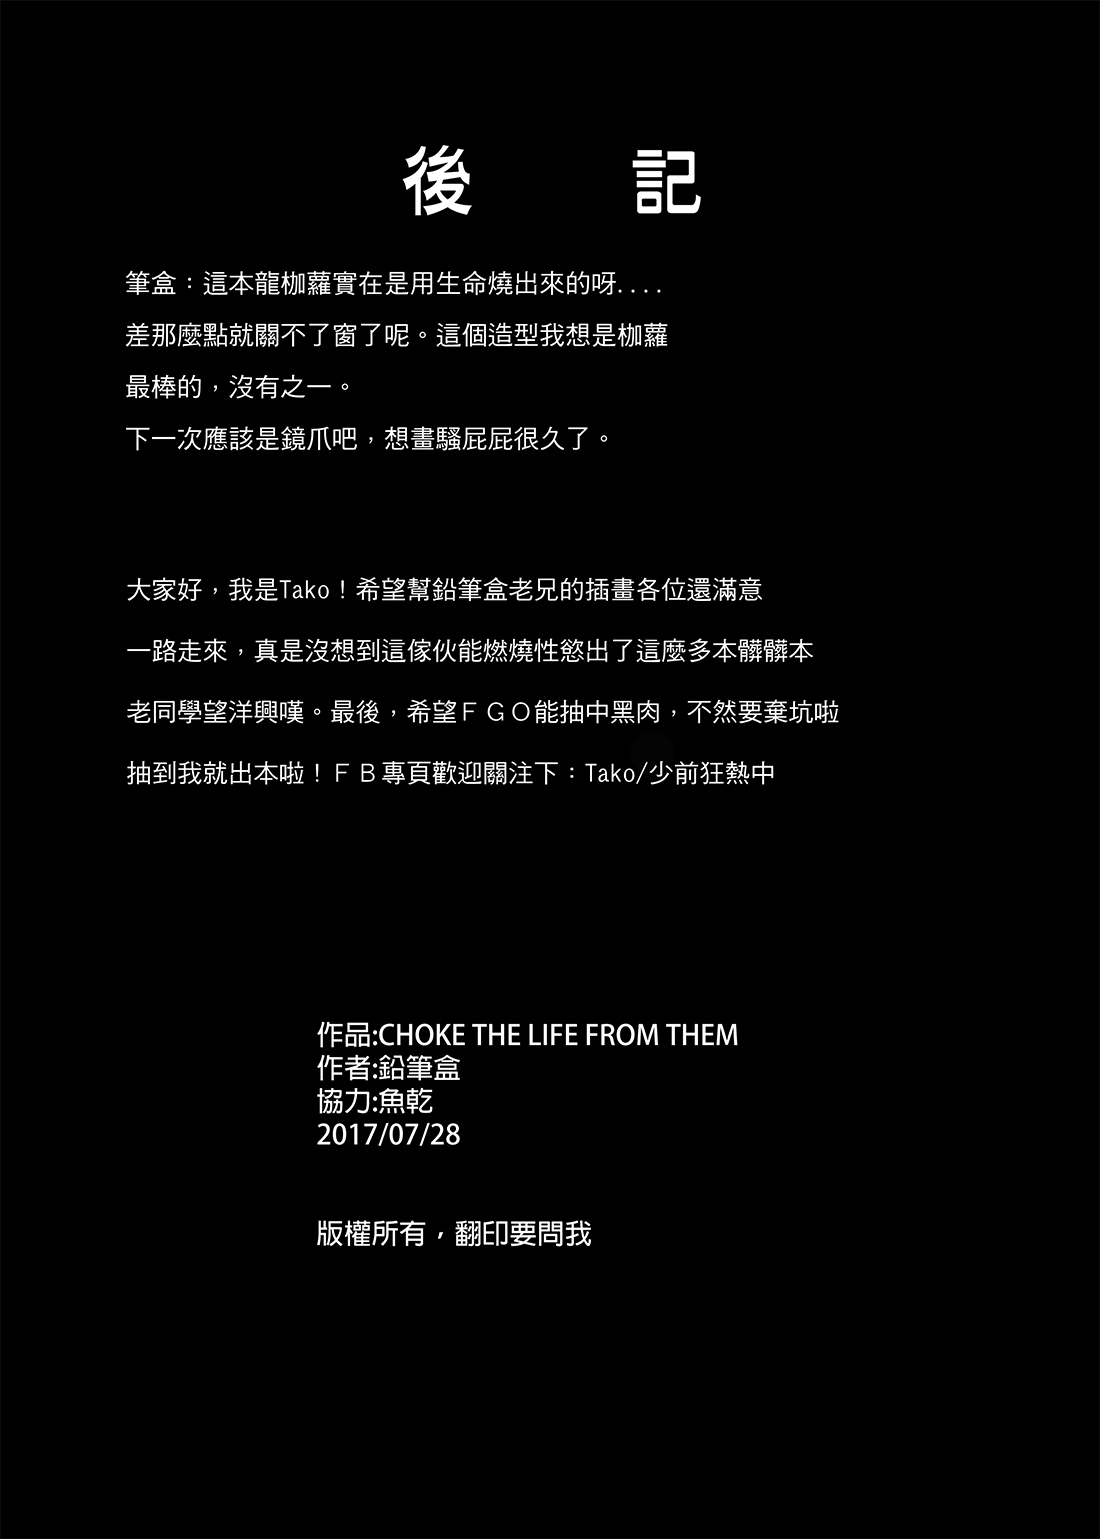 (FF30) [鉛筆盒] Choke the life from them (League of Legends) [中国語]